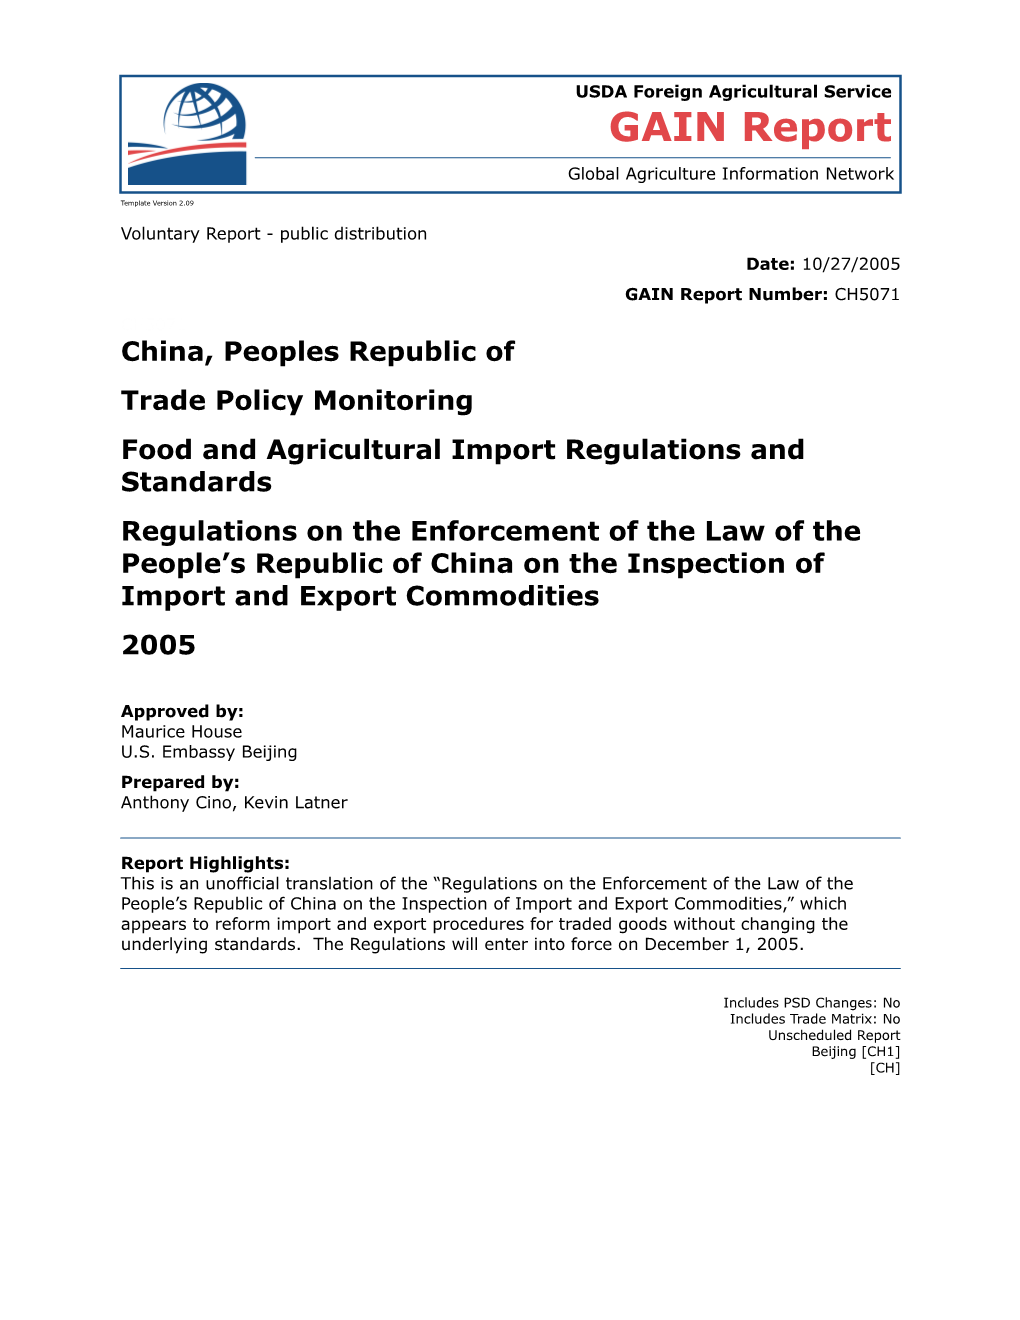 Regulations on the Enforcement of the Law of the PRC on the Inspection of Import and Export